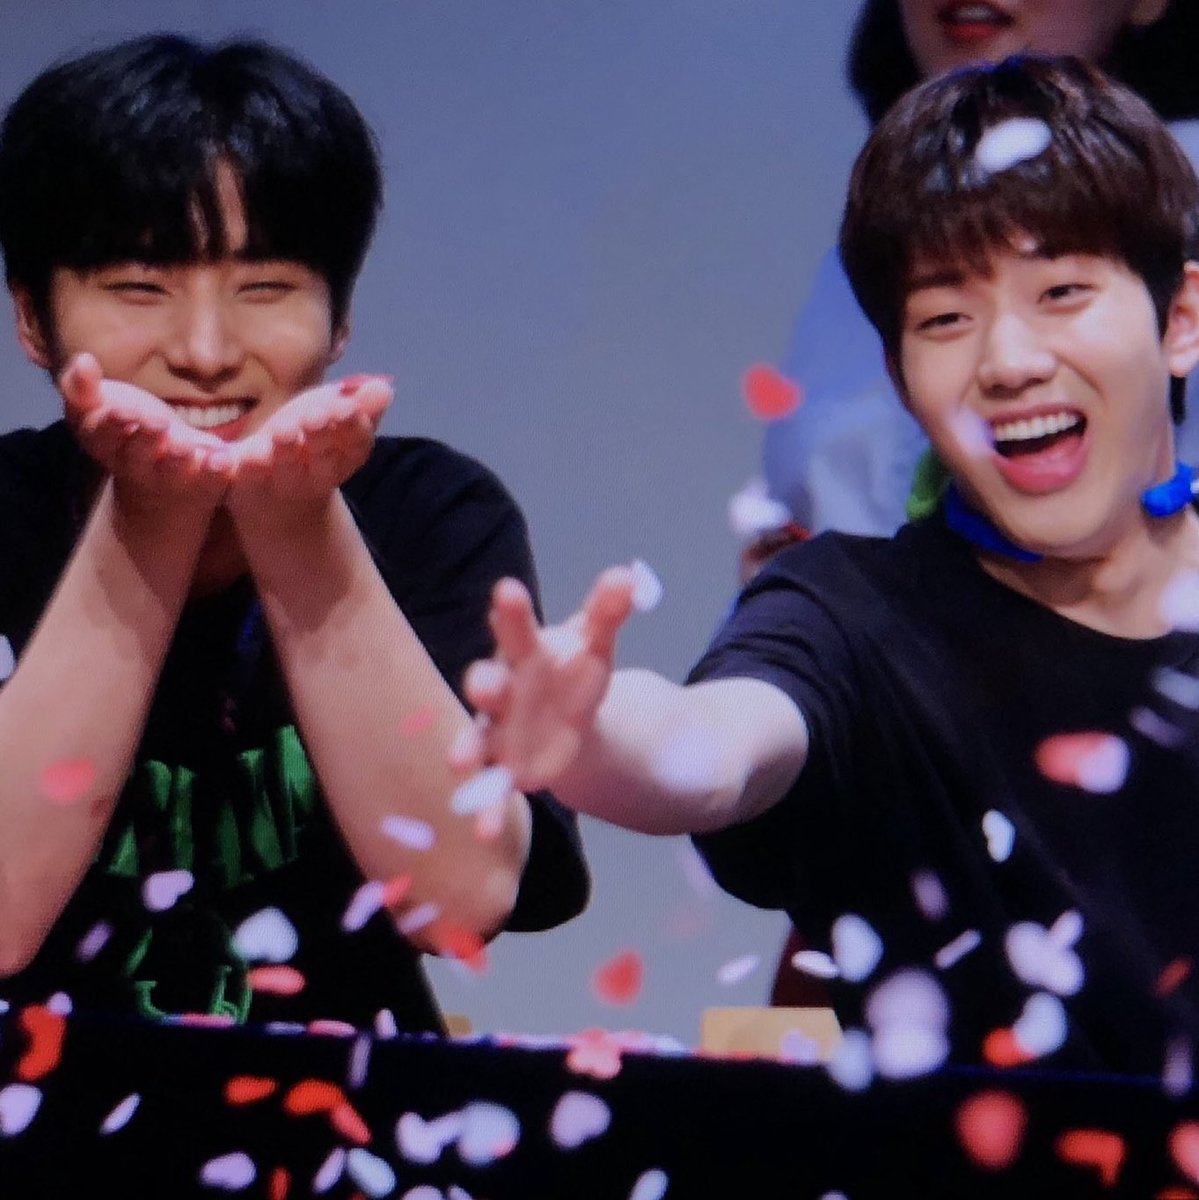 MOMMY K and BABY DRUM thread because why not #DAY6    #데이식스    #영케이  #도운